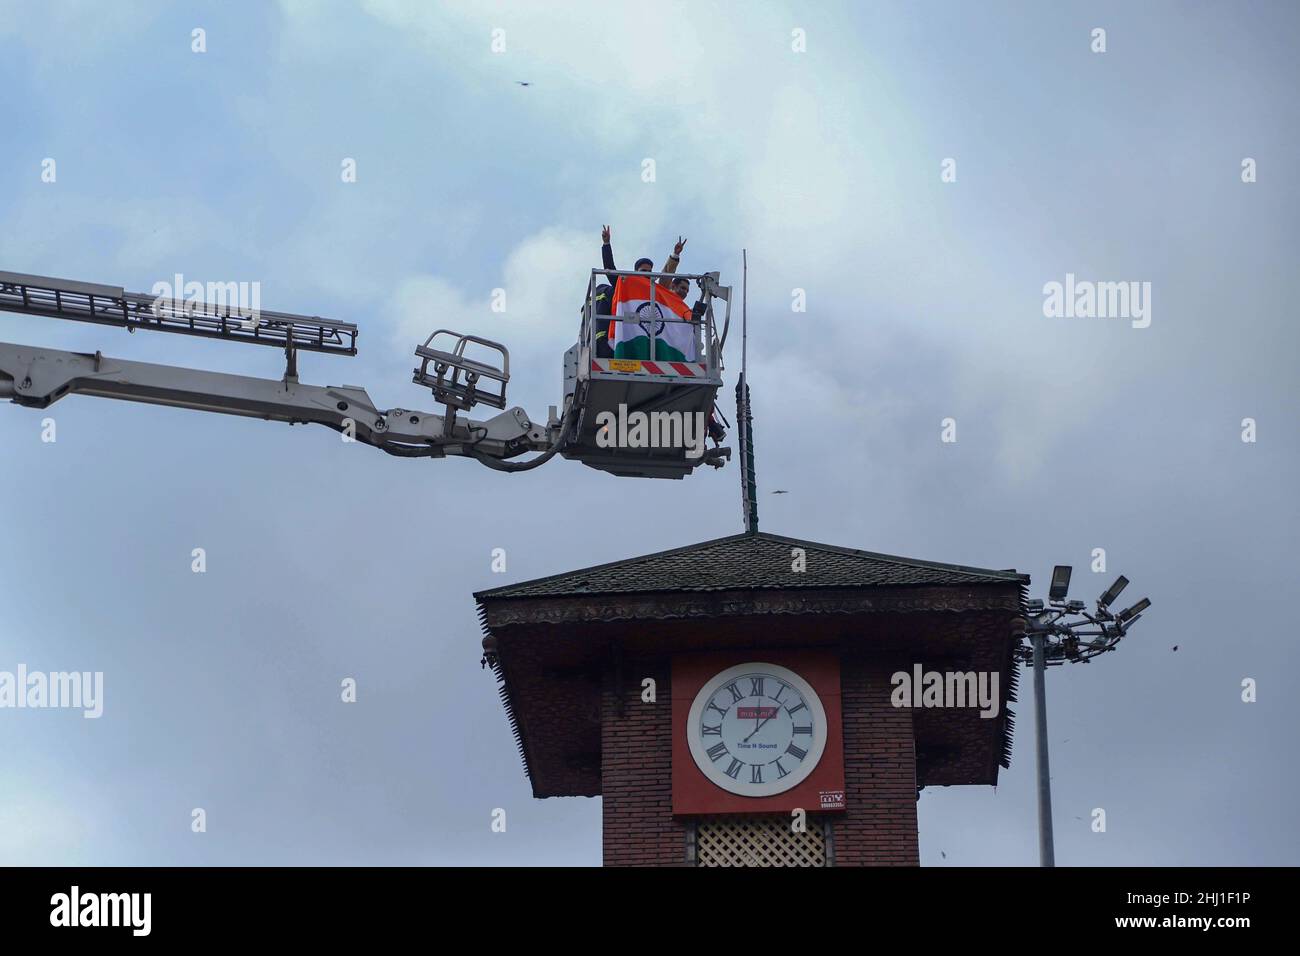 Indian activist place an Indian flag at the top of a clock tower in Lal Chowk to celebrate India's 73rd Republic Day in Srinagar on January 26, 2022. (Photo by Faisal Bashir/INA Photo Agency/Sipa USA) Stock Photo